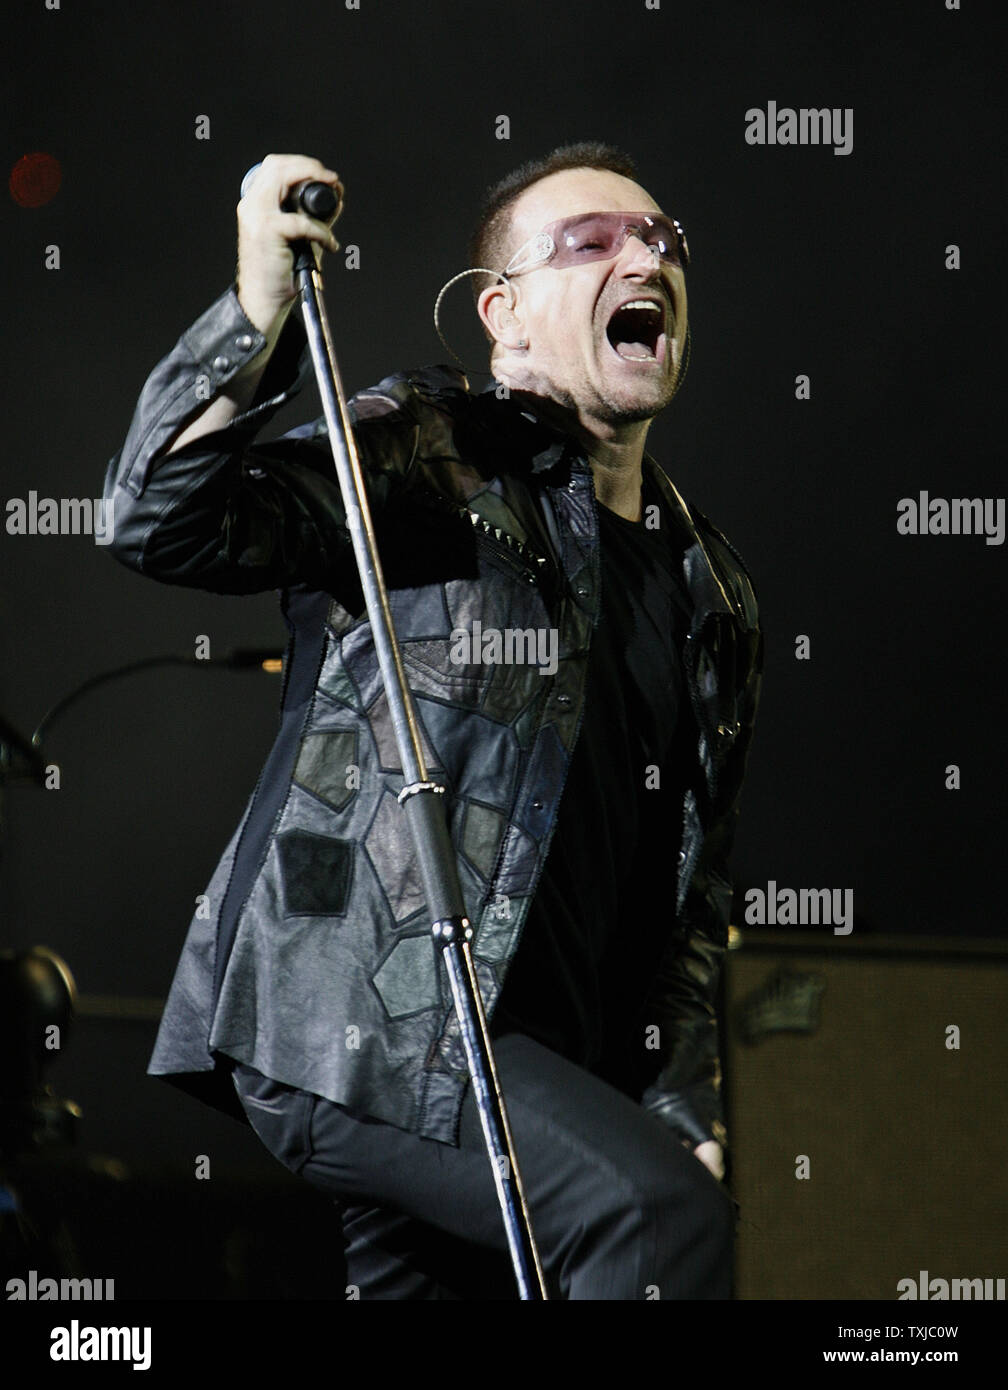 Bono of U2 performs at the first concert of their 360 Degree North American Tour at Soldier Field in Chicago on September 12, 2009.     UPI/Brian Kersey Stock Photo